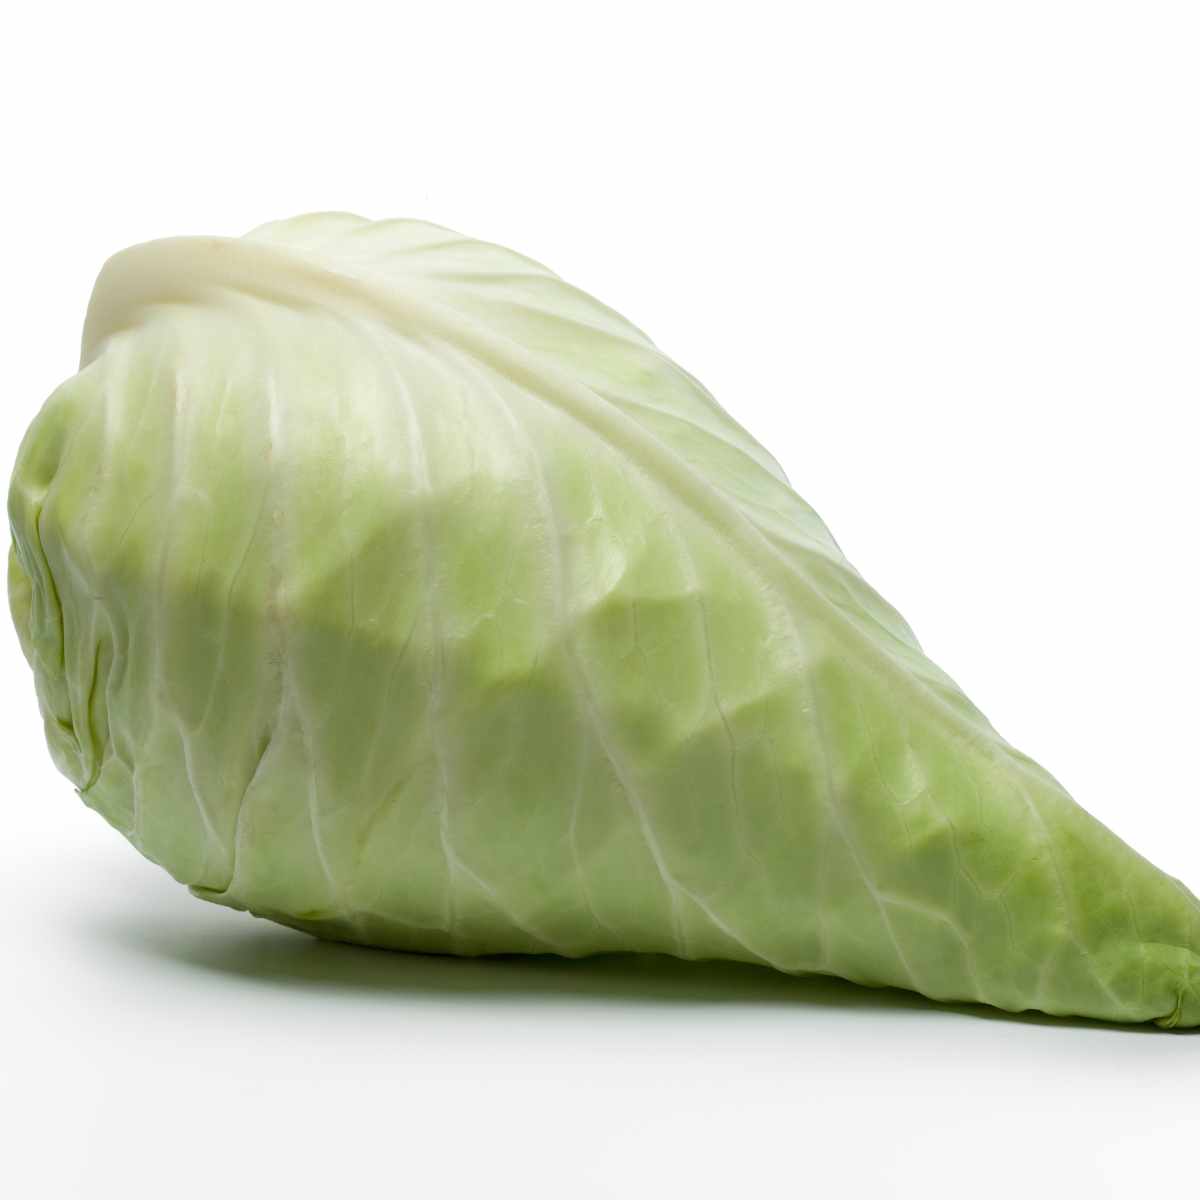 hispi cabbage on a white background.